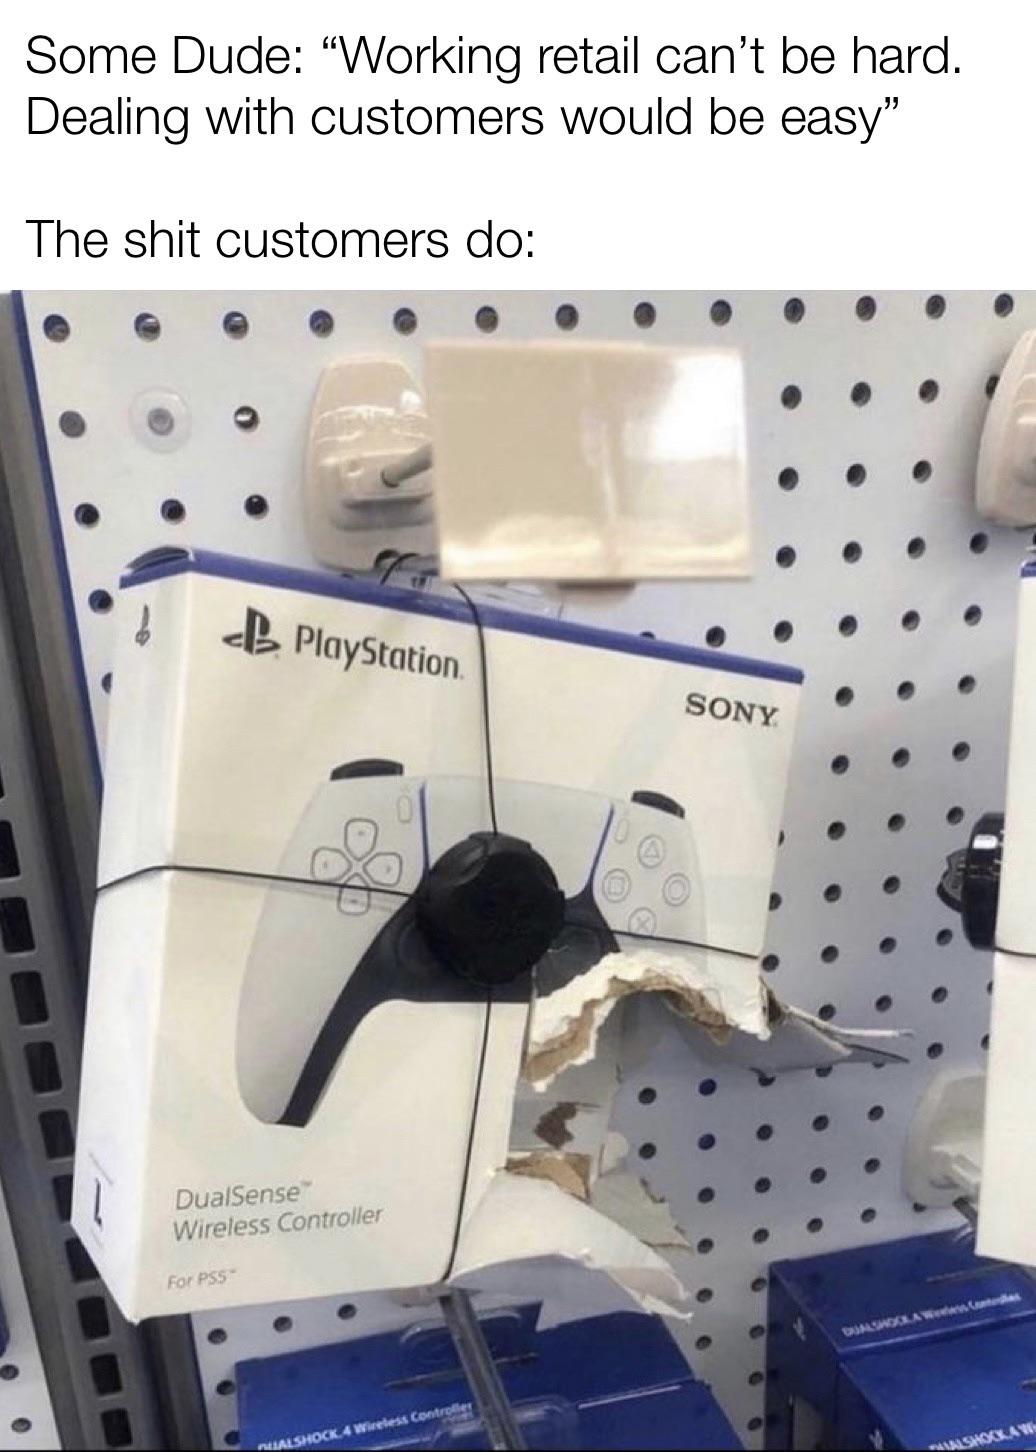 ps5 meme boyfriend - Some Dude Working retail can't be hard. Dealing with customers would be easy" The shit customers do B PlayStation Sony DualSense Wireless Controller For Pss Asid Law Realshock 4 Wireless Controller Baskickar